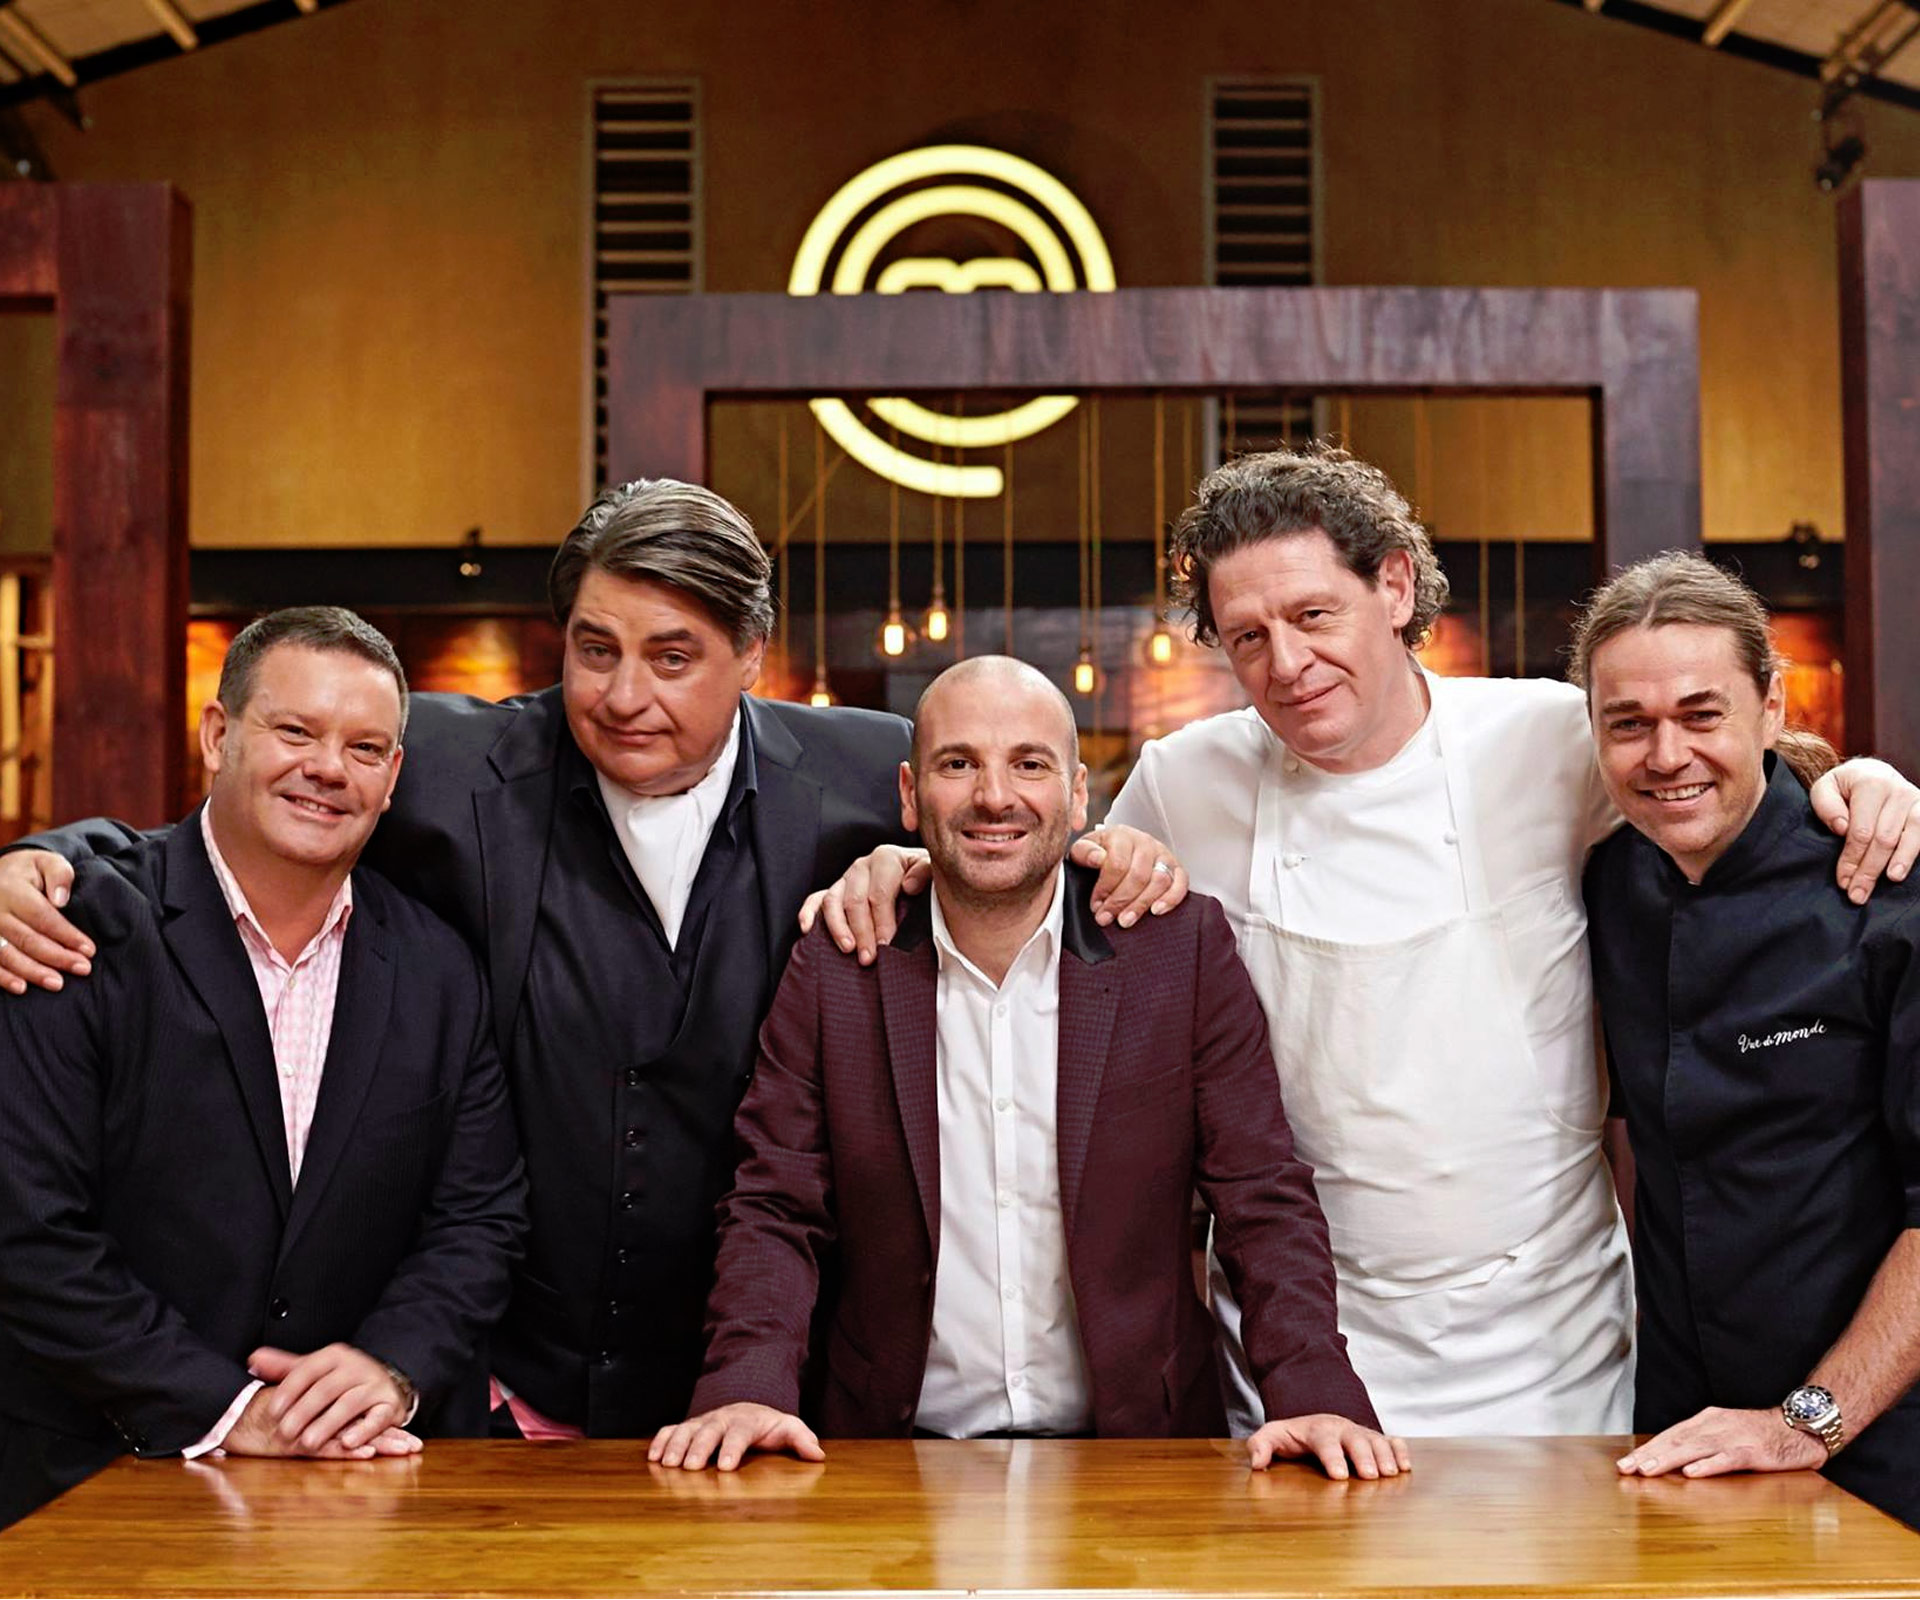 Masterchef’s Matt Preston finally speaks out about George Calombaris’ assault charge